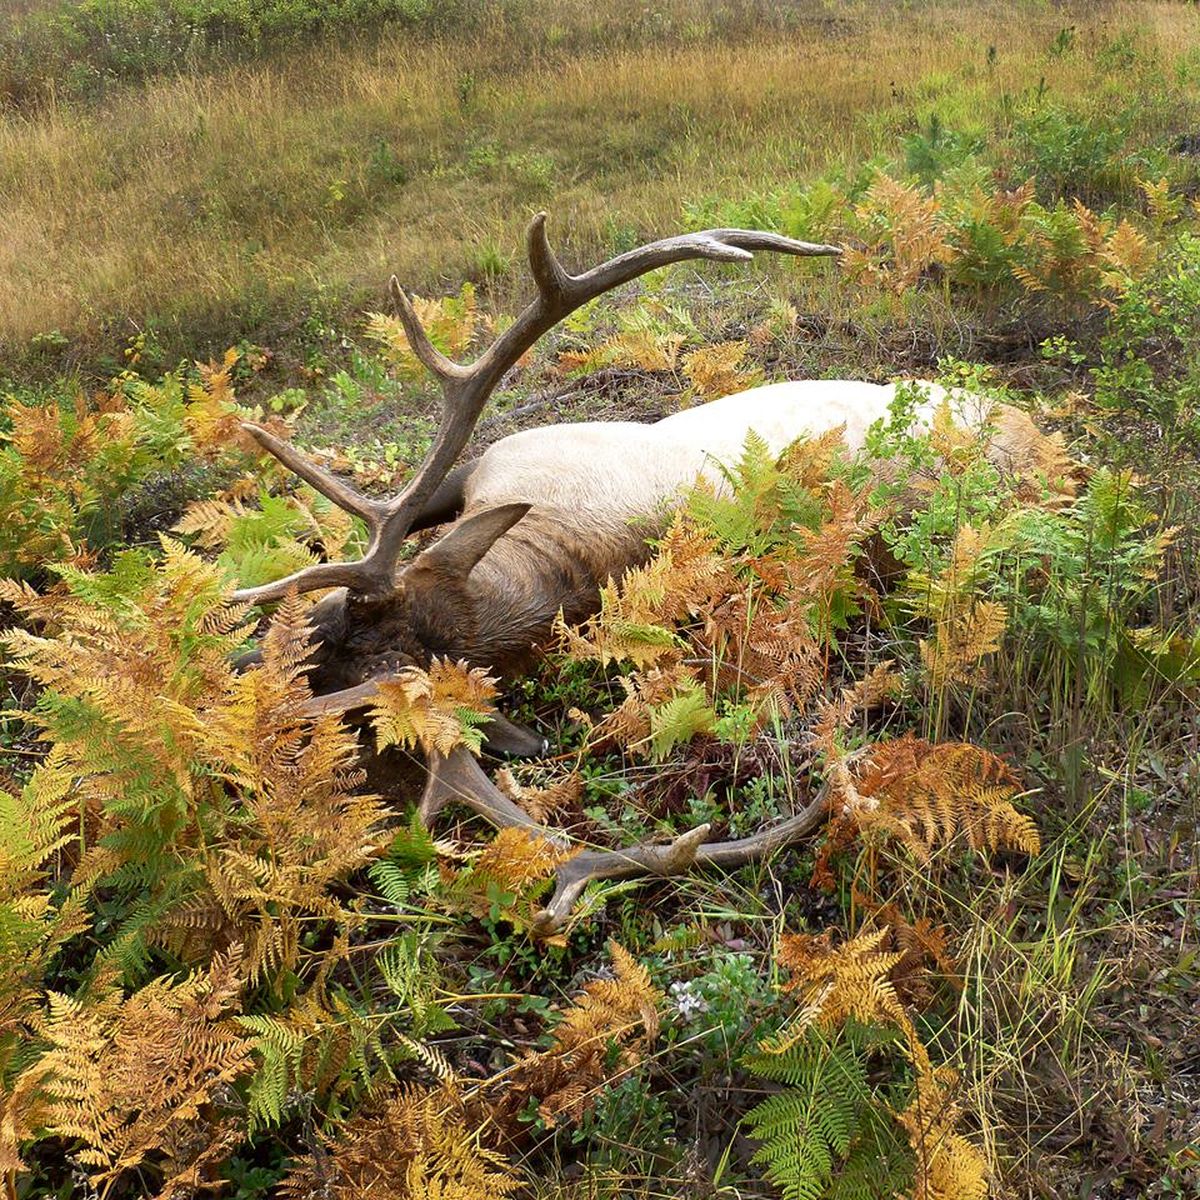 Officers bag bull elk poaching suspect in Pend Oreille County | The ...